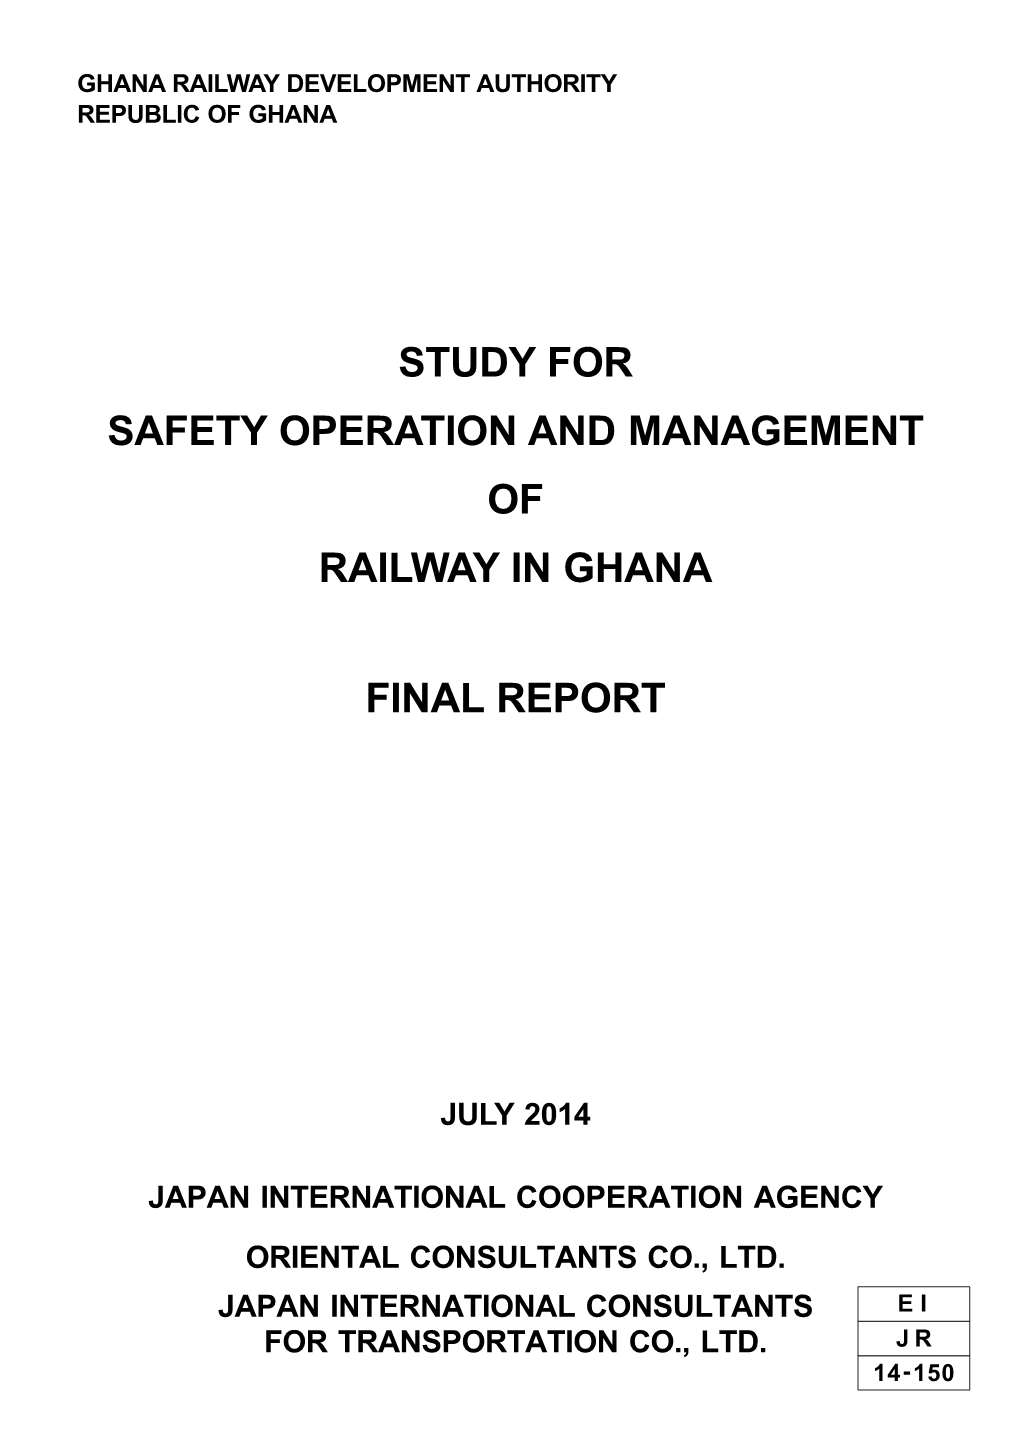 Study for Safety Operation and Management of Railway in Ghana